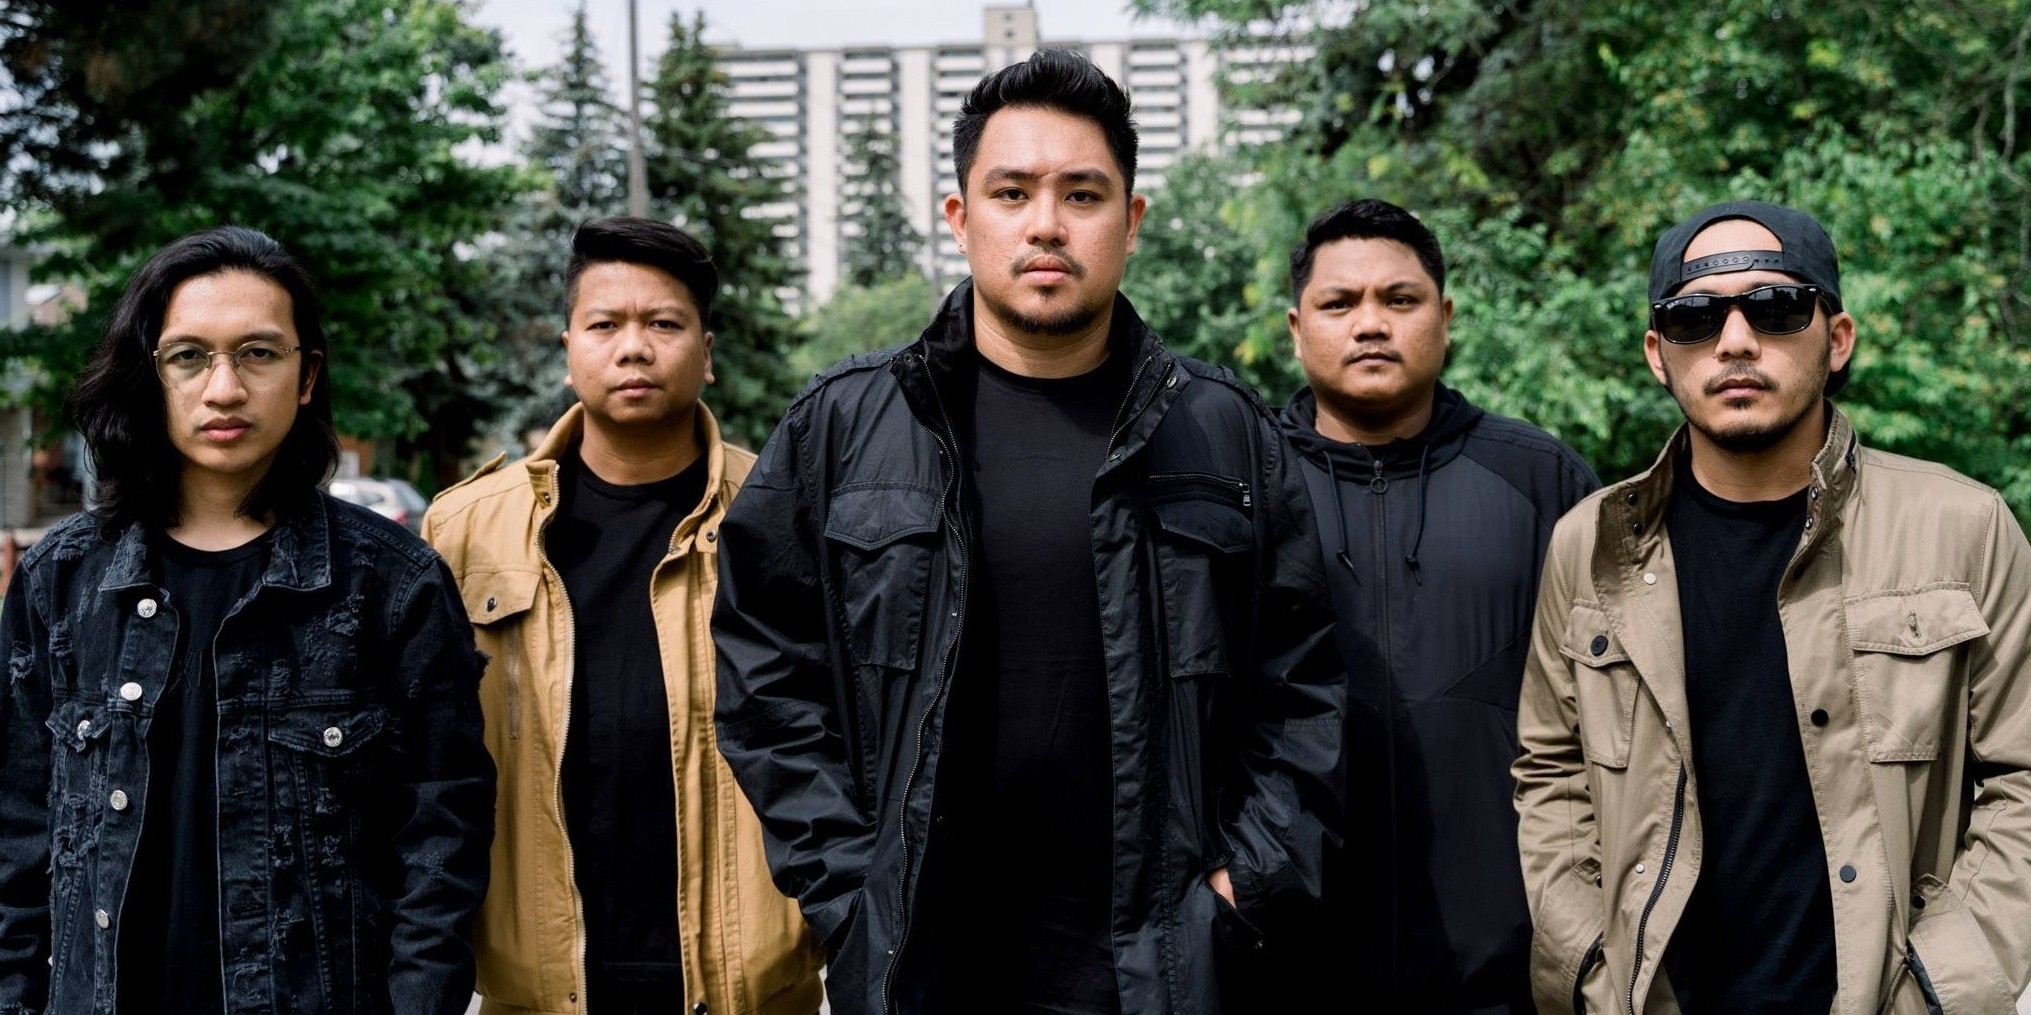 December Avenue deliver "a different take from the usual heart-breaking hits" with new single 'Bakas ng Talampakan' – listen